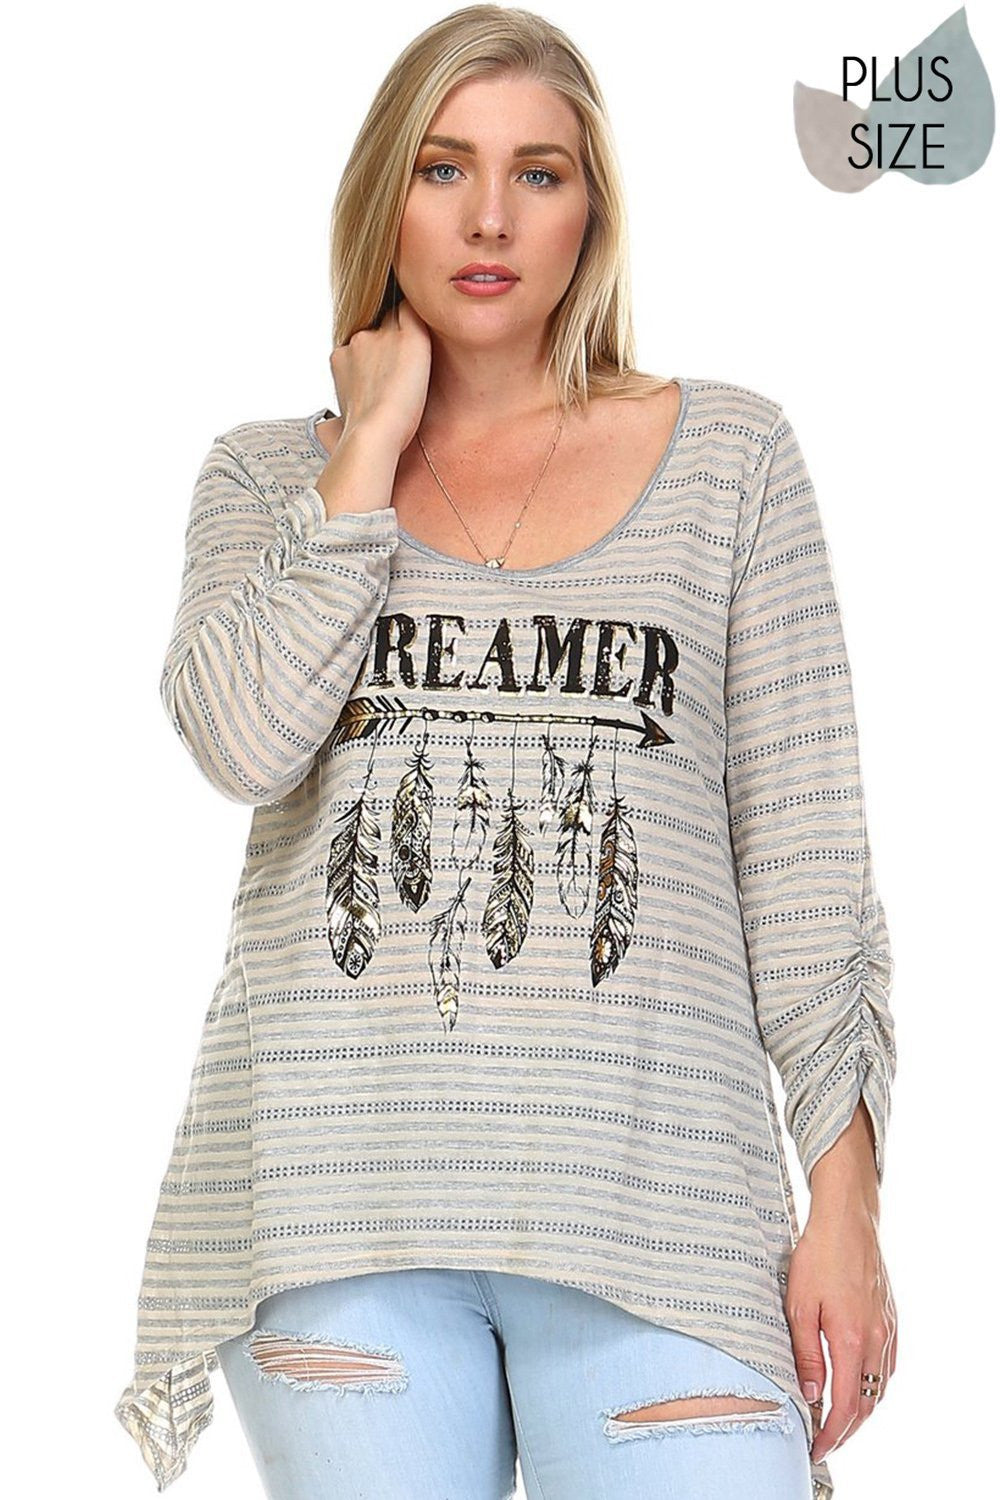  Plus Size Striped "Dreamer" Scoop neck tunic top with shirring sleeve detail Perfect skirt for an effortless boho style, pair with boots for fall or your favorite sandals for summer. Festivals, Beach Day, Vacation